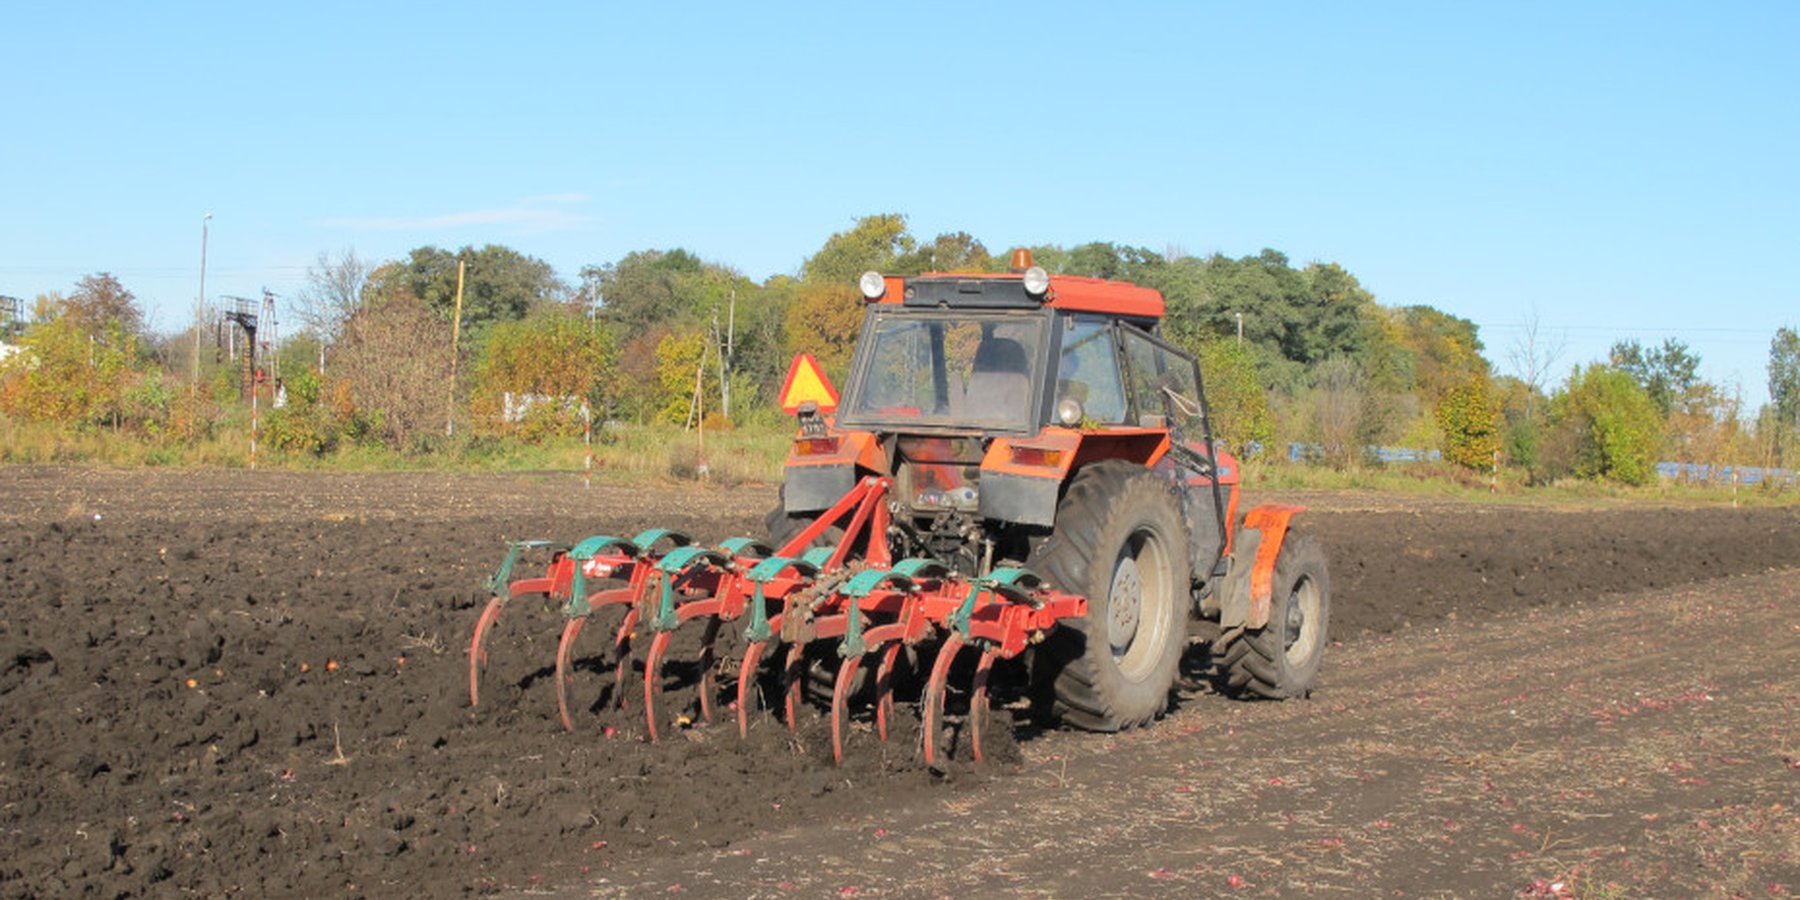 Tractor with subsoiler performing tillage